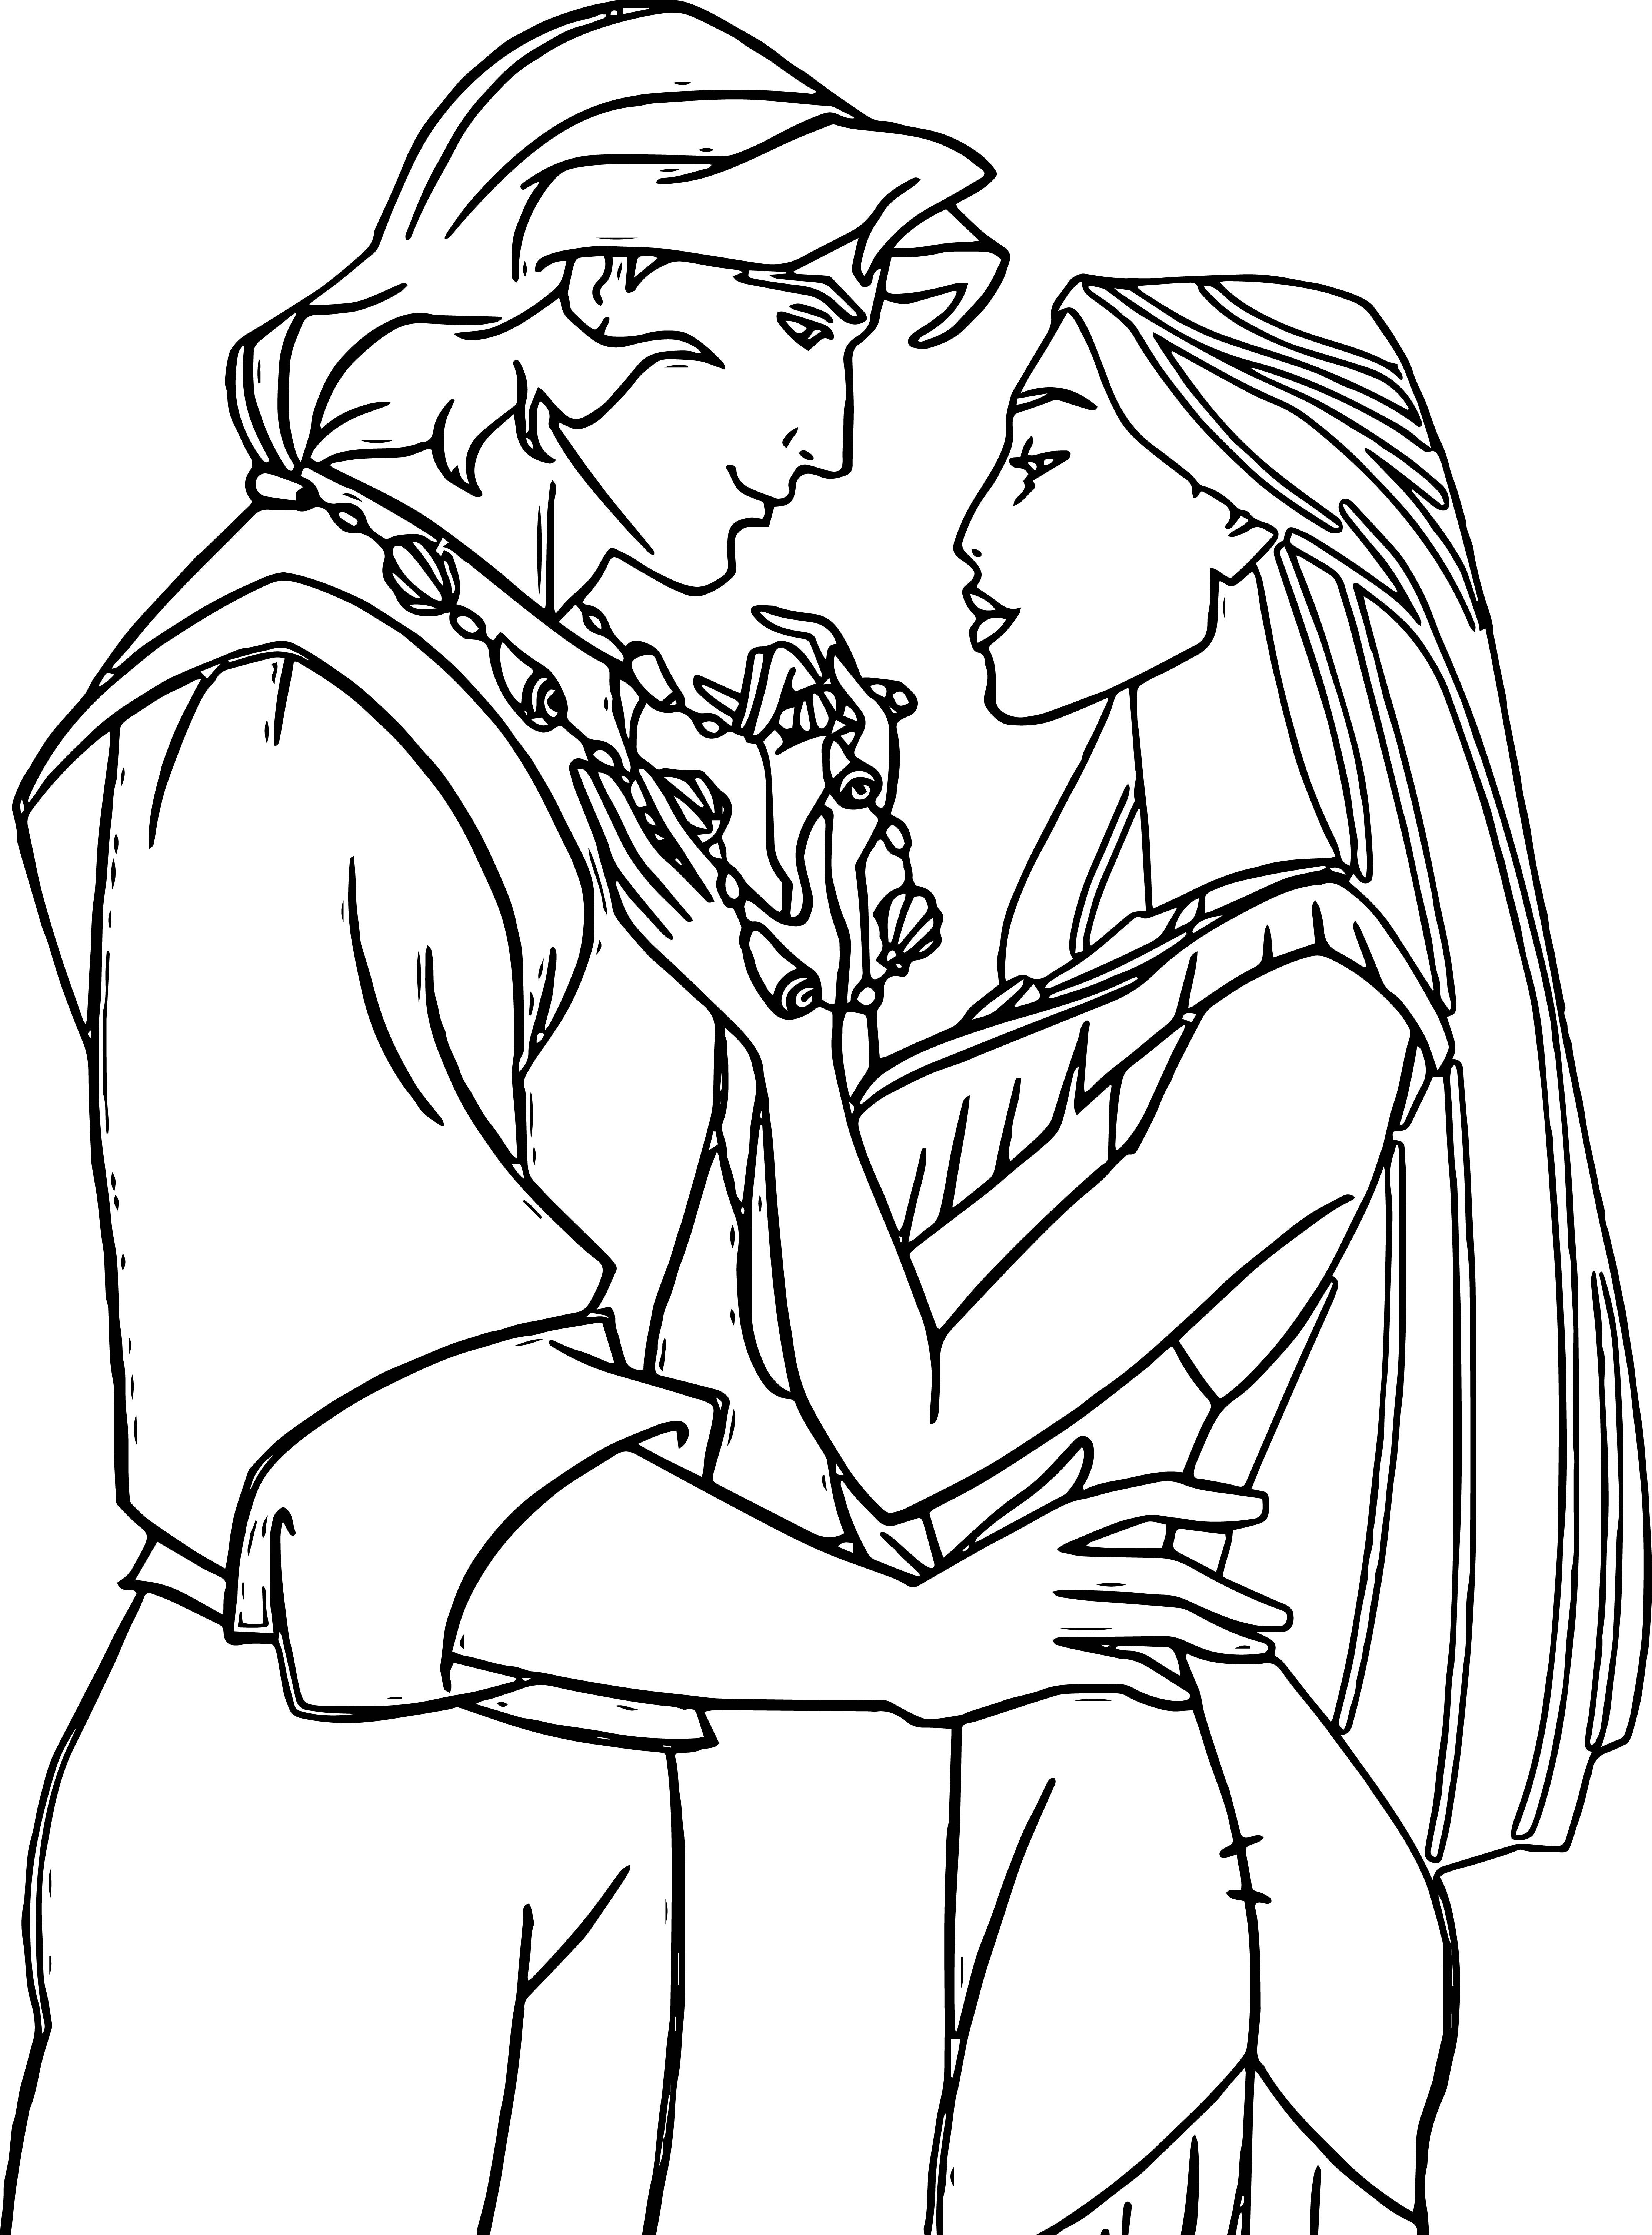 Pocahontas Coloring Pages | Disney coloring pages, Coloring ...